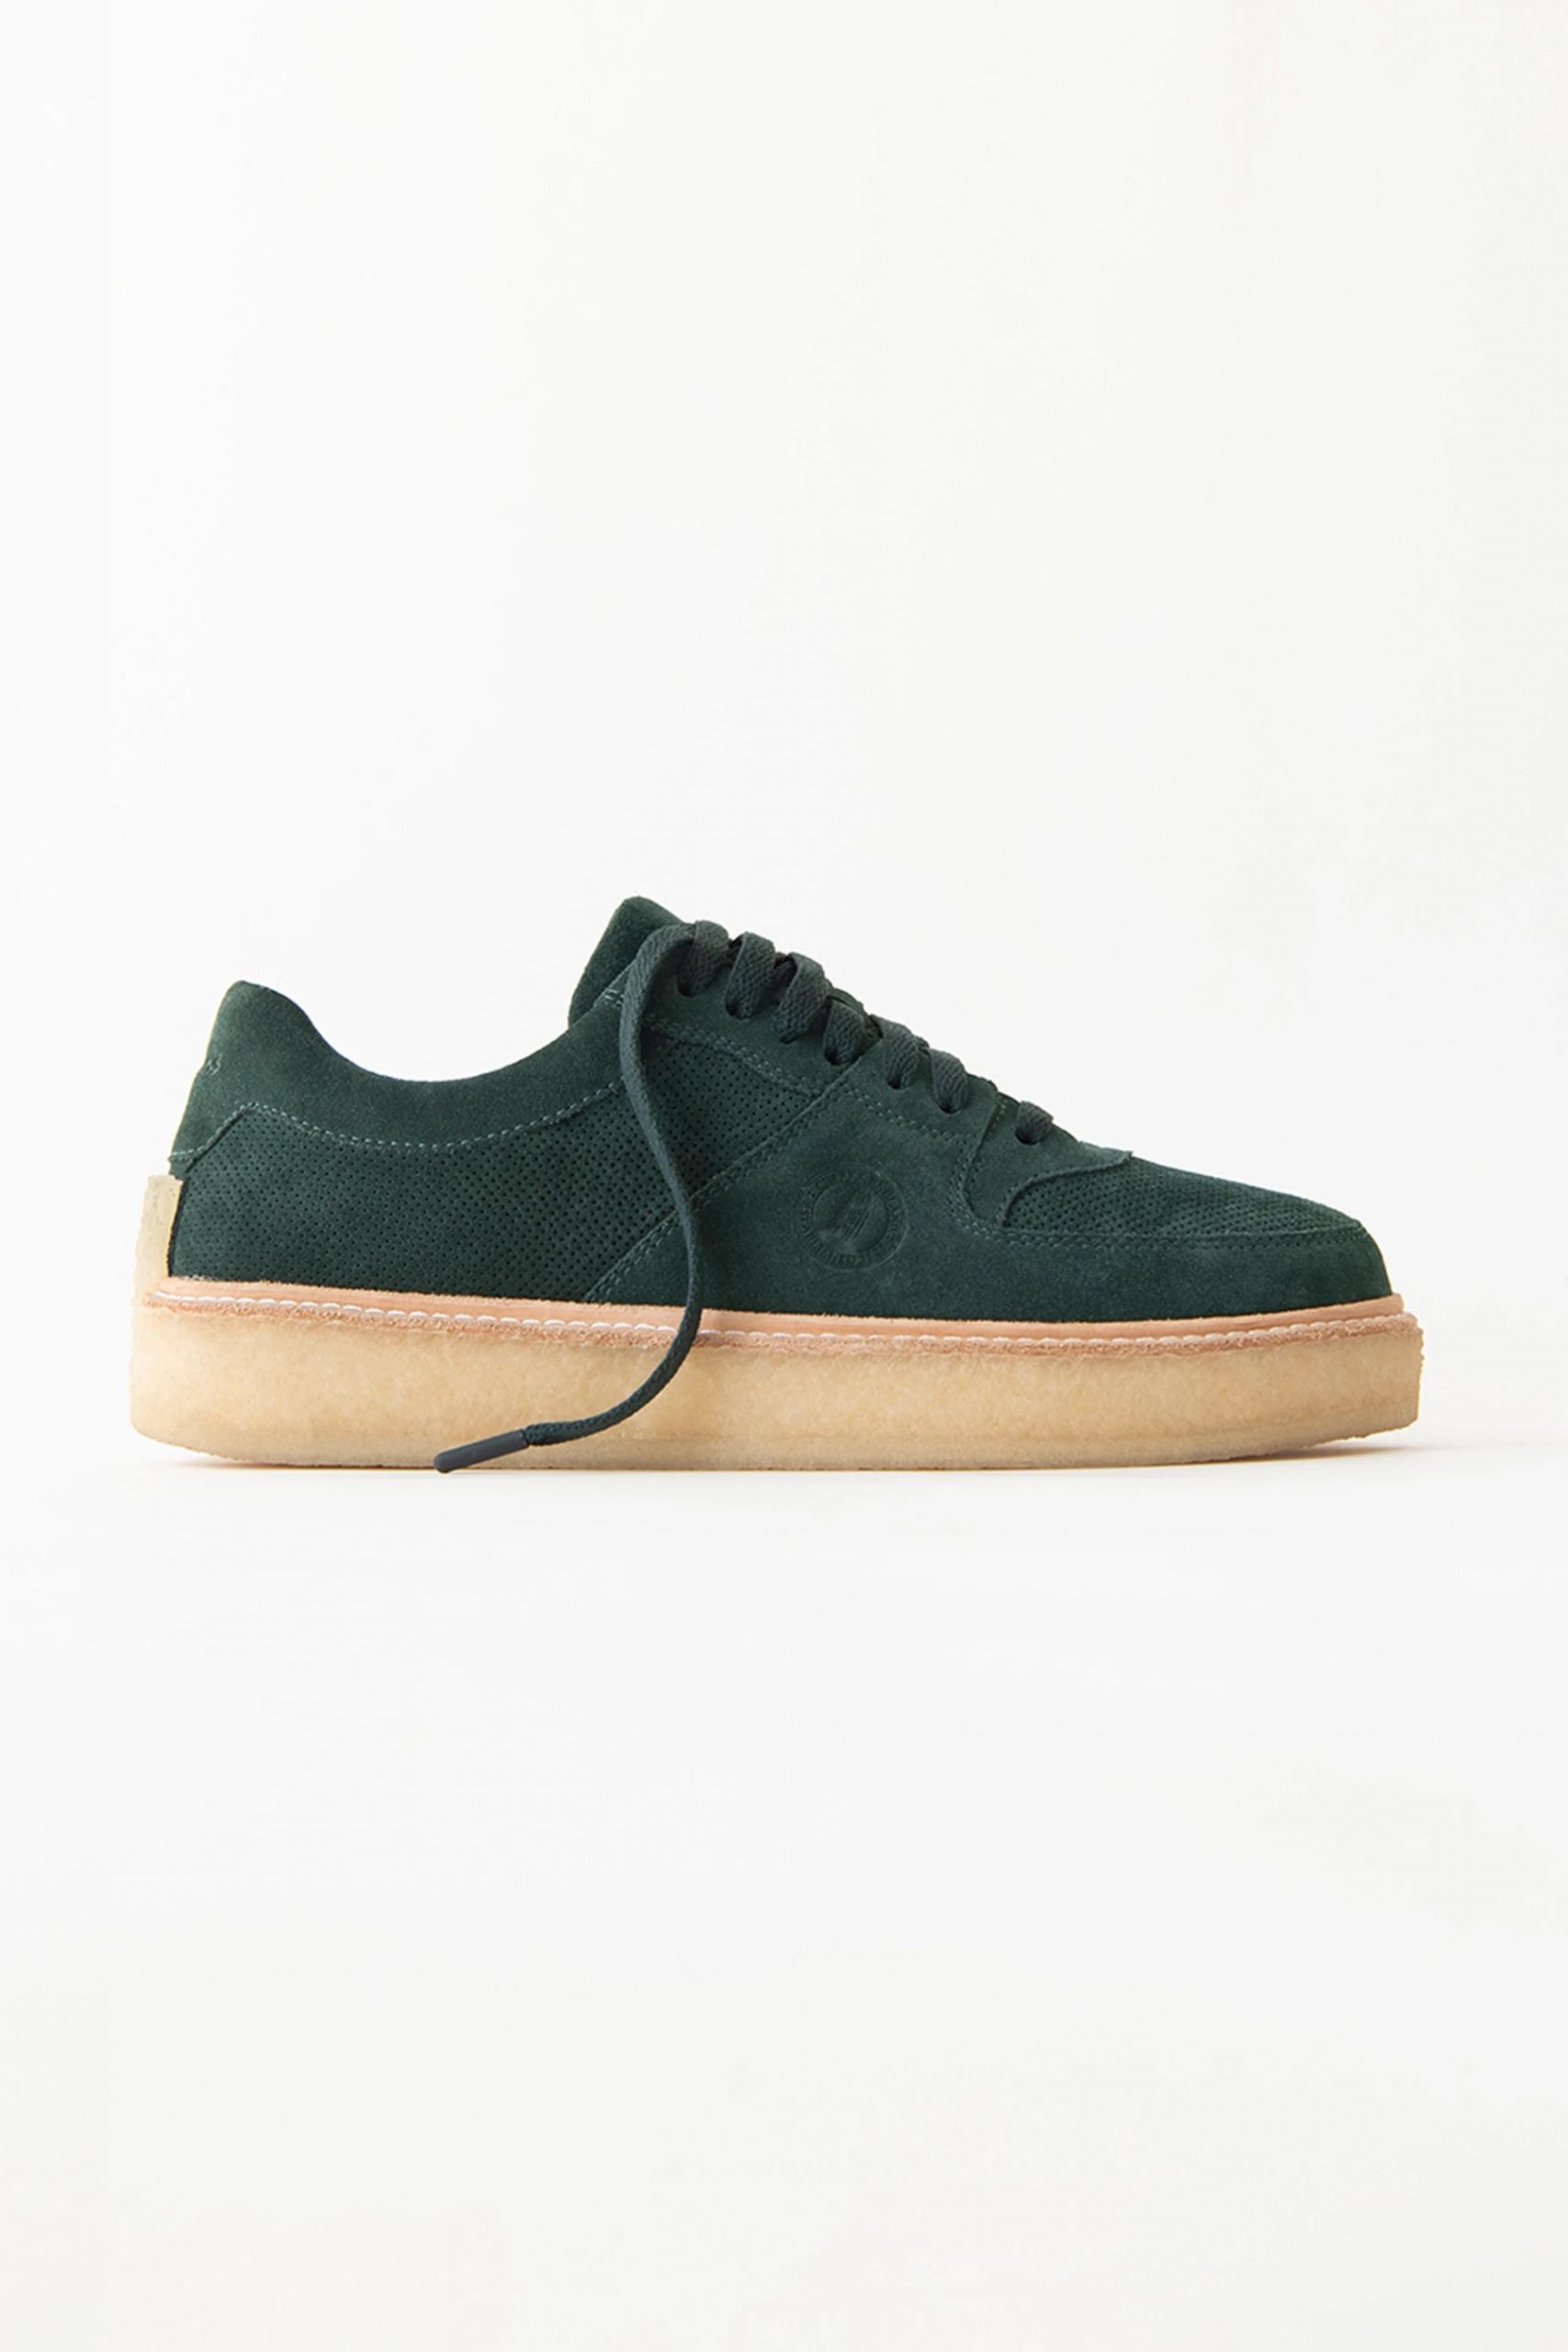 8th St by Ronnie Fieg for Clarks Originals 发售信息完整公开 – NOWRE现客